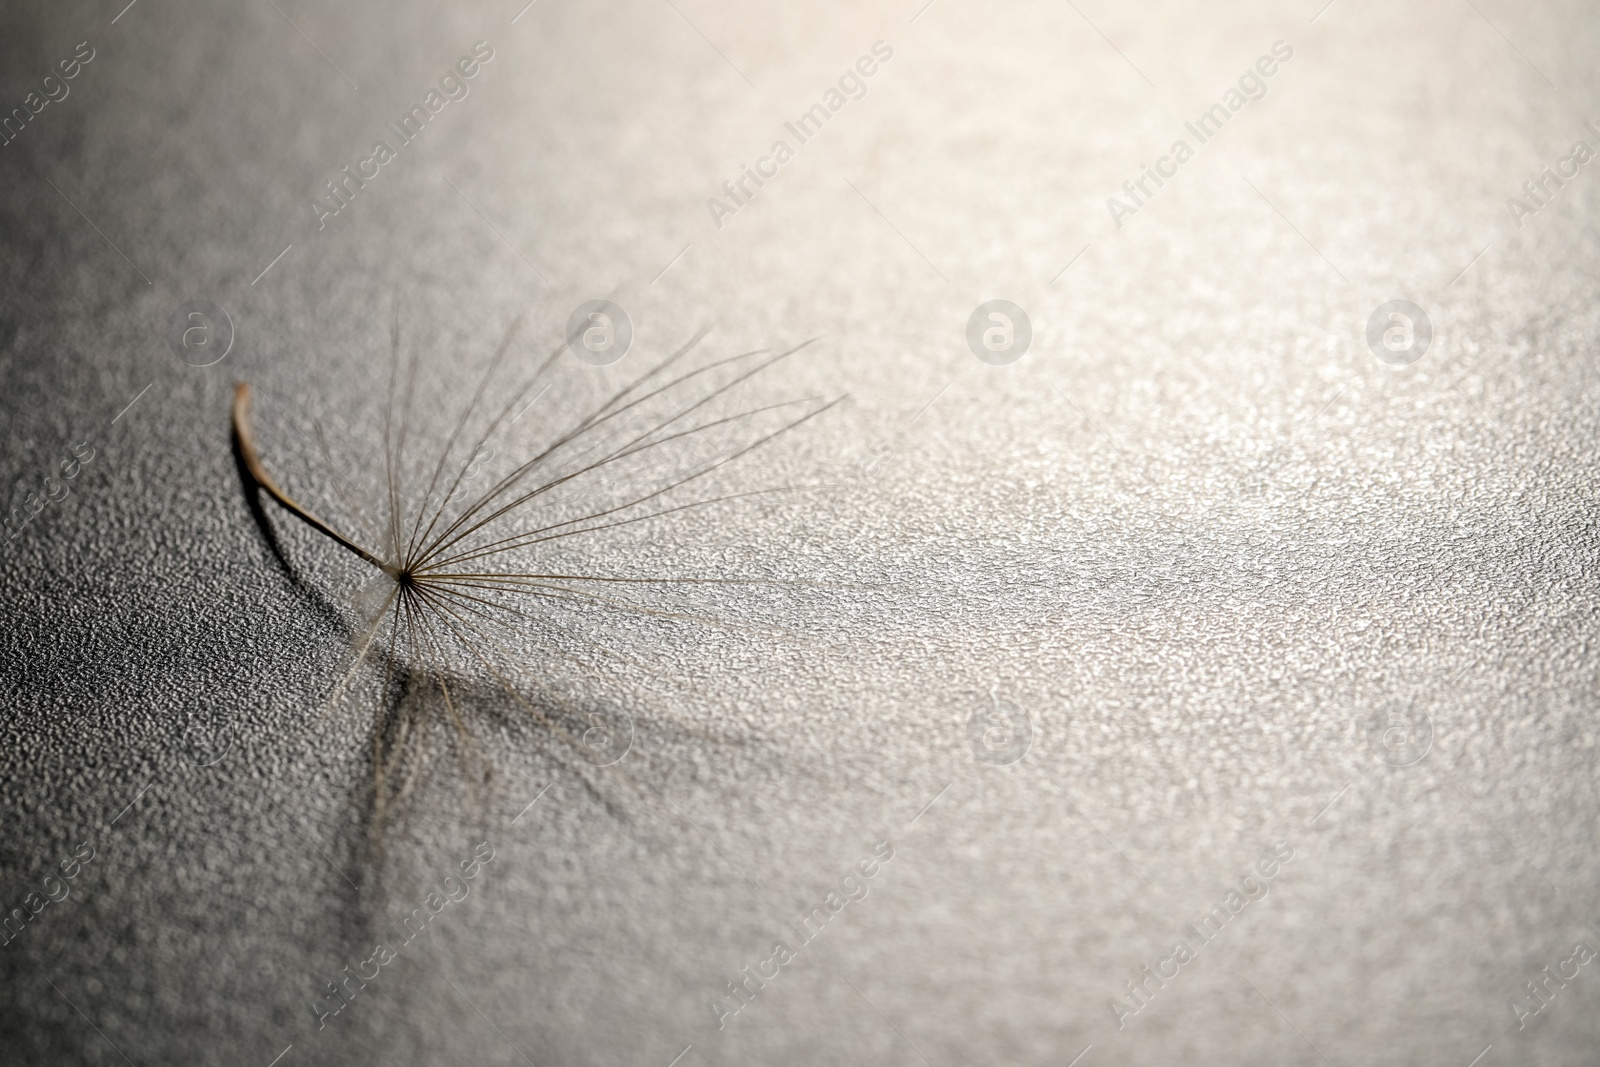 Photo of Seed of dandelion flower on grey background, space for text